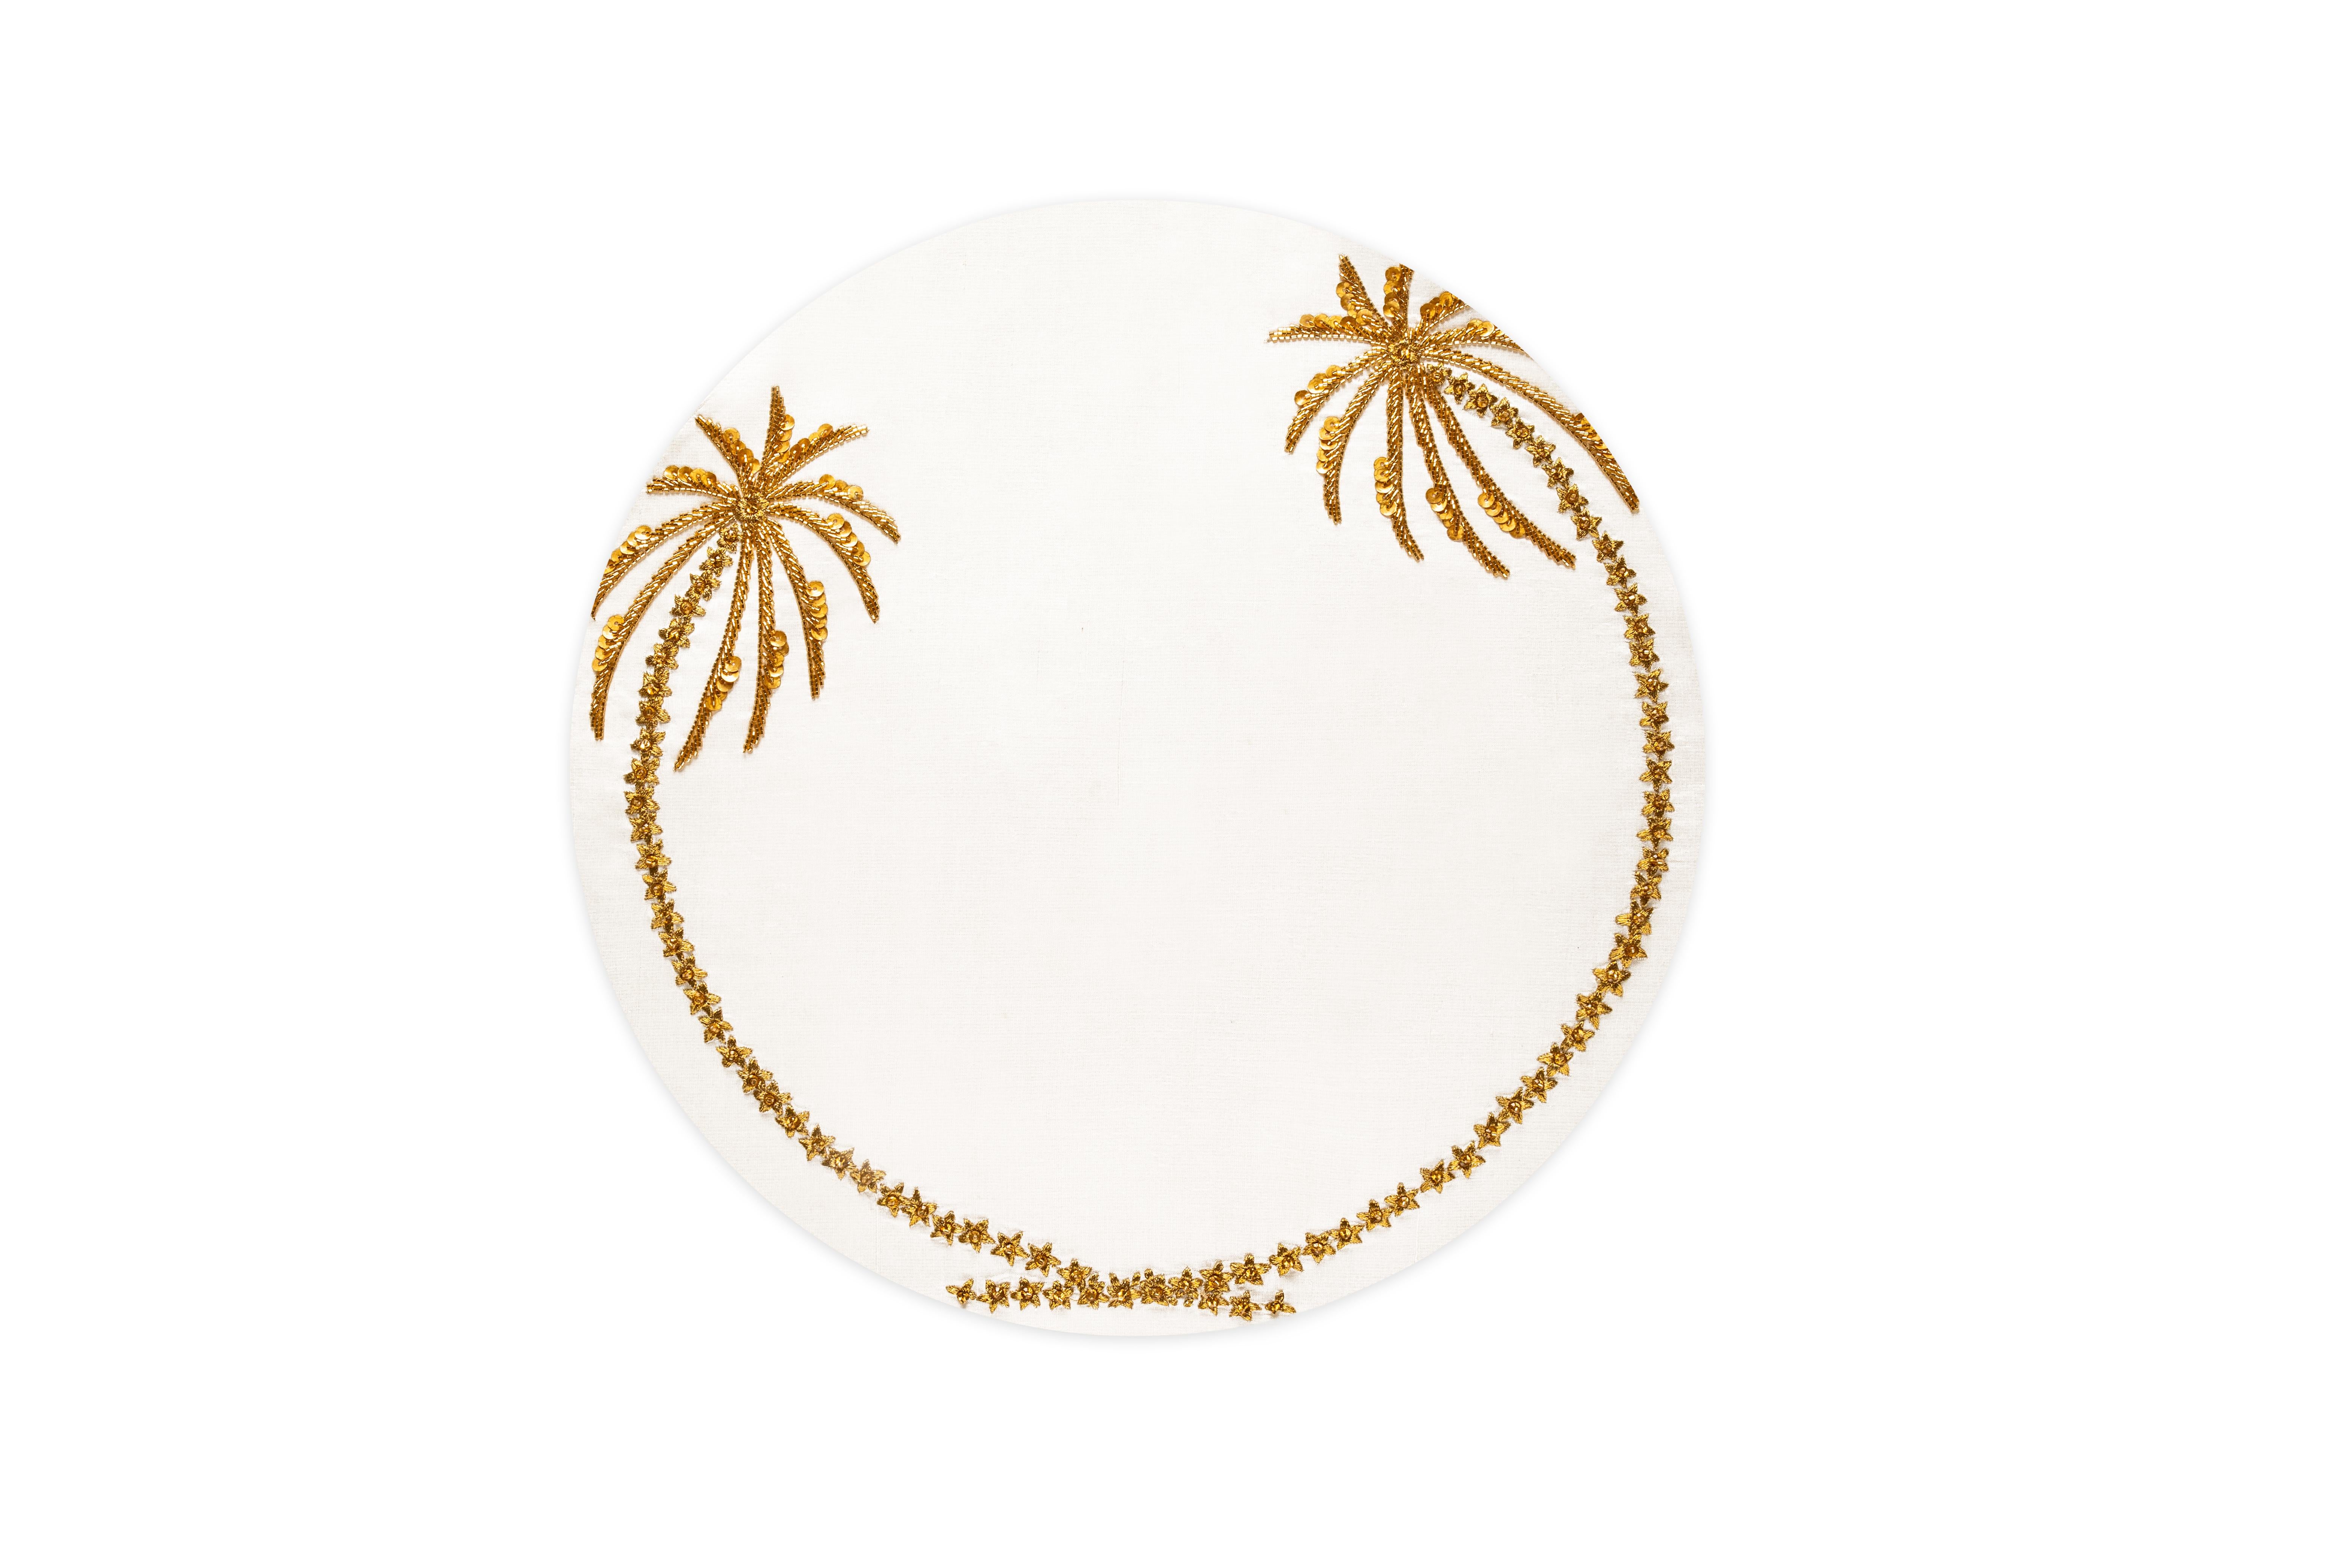 All hand made, Les Palmier placemat marries two palm trees to create a magnificent halo around your dinnerware. The trunks are intricately embroidered with gold threads while the palm leaves are fashioned with beadwork.